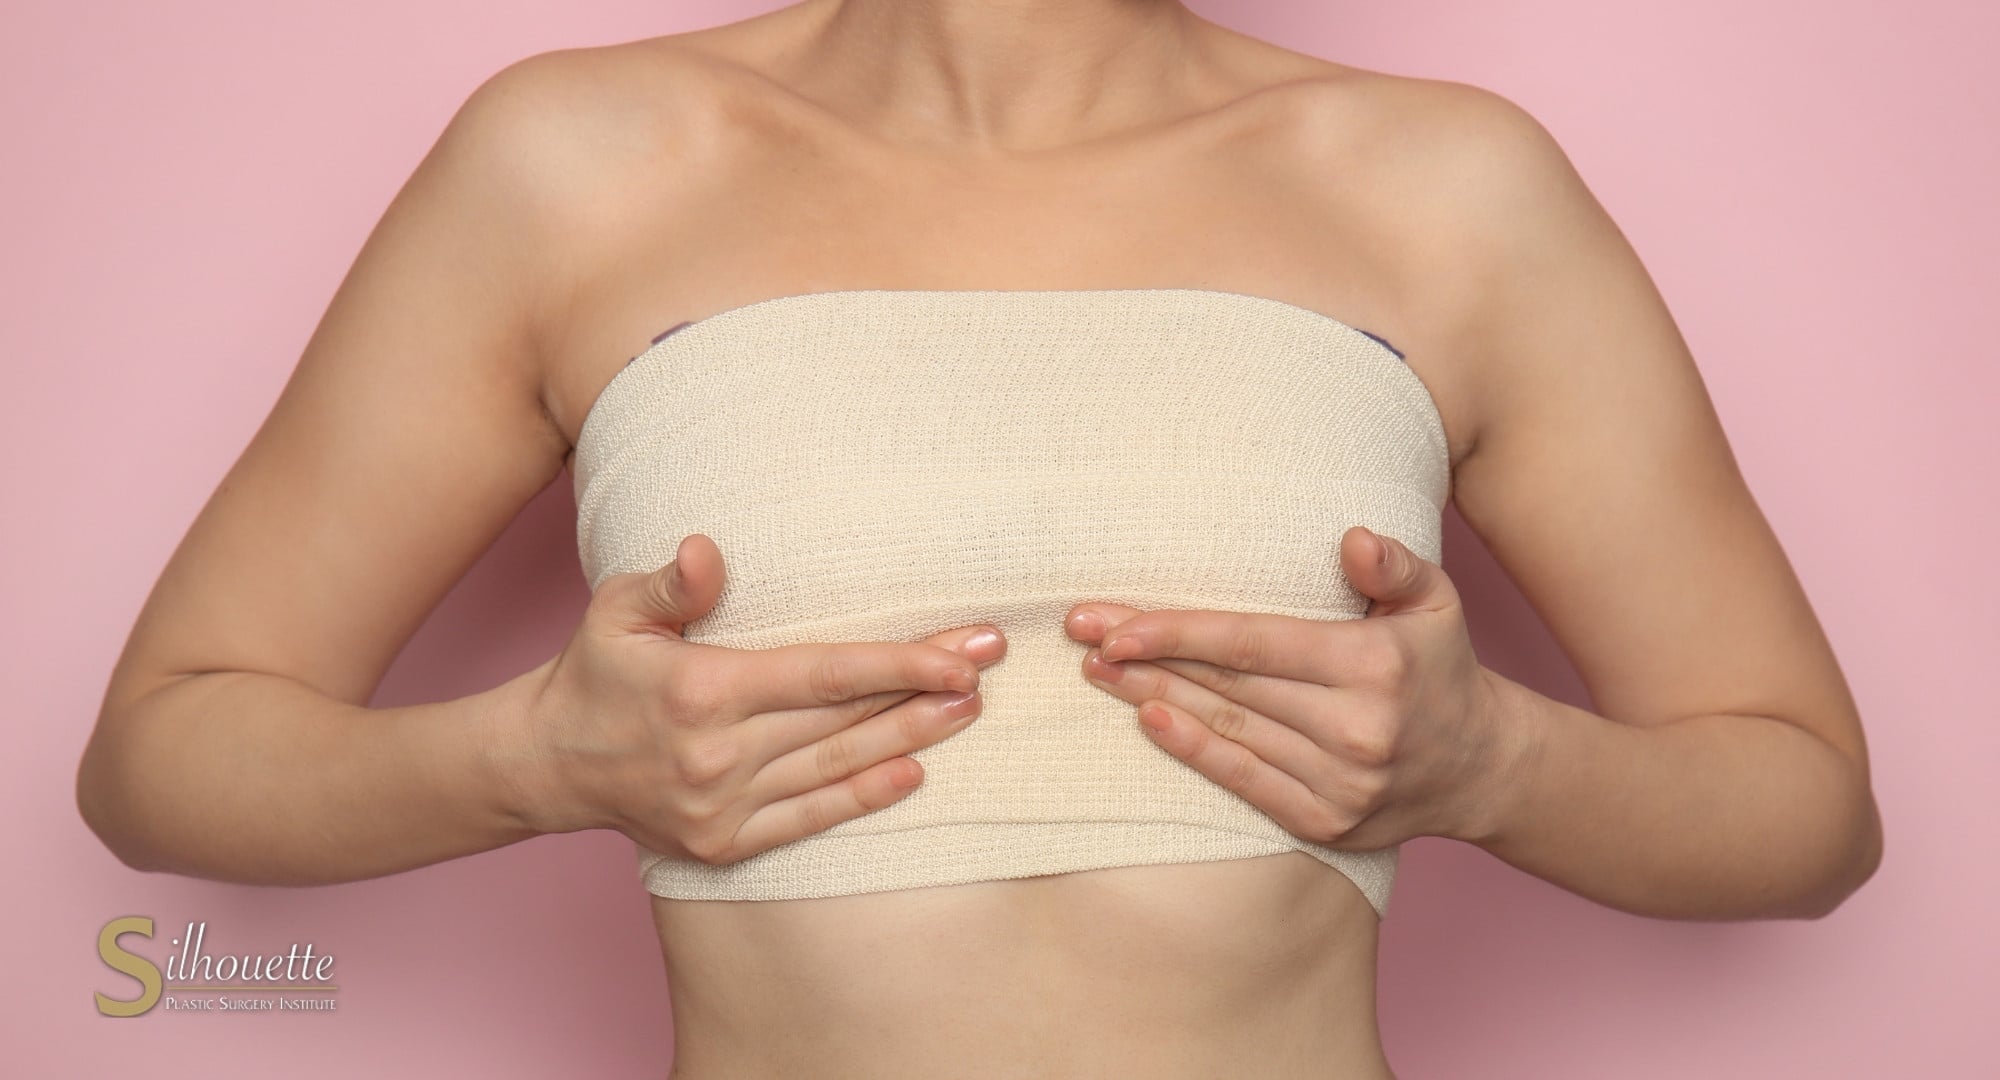 Breast lift for asymmetrical breasts - Plastic Surgeon